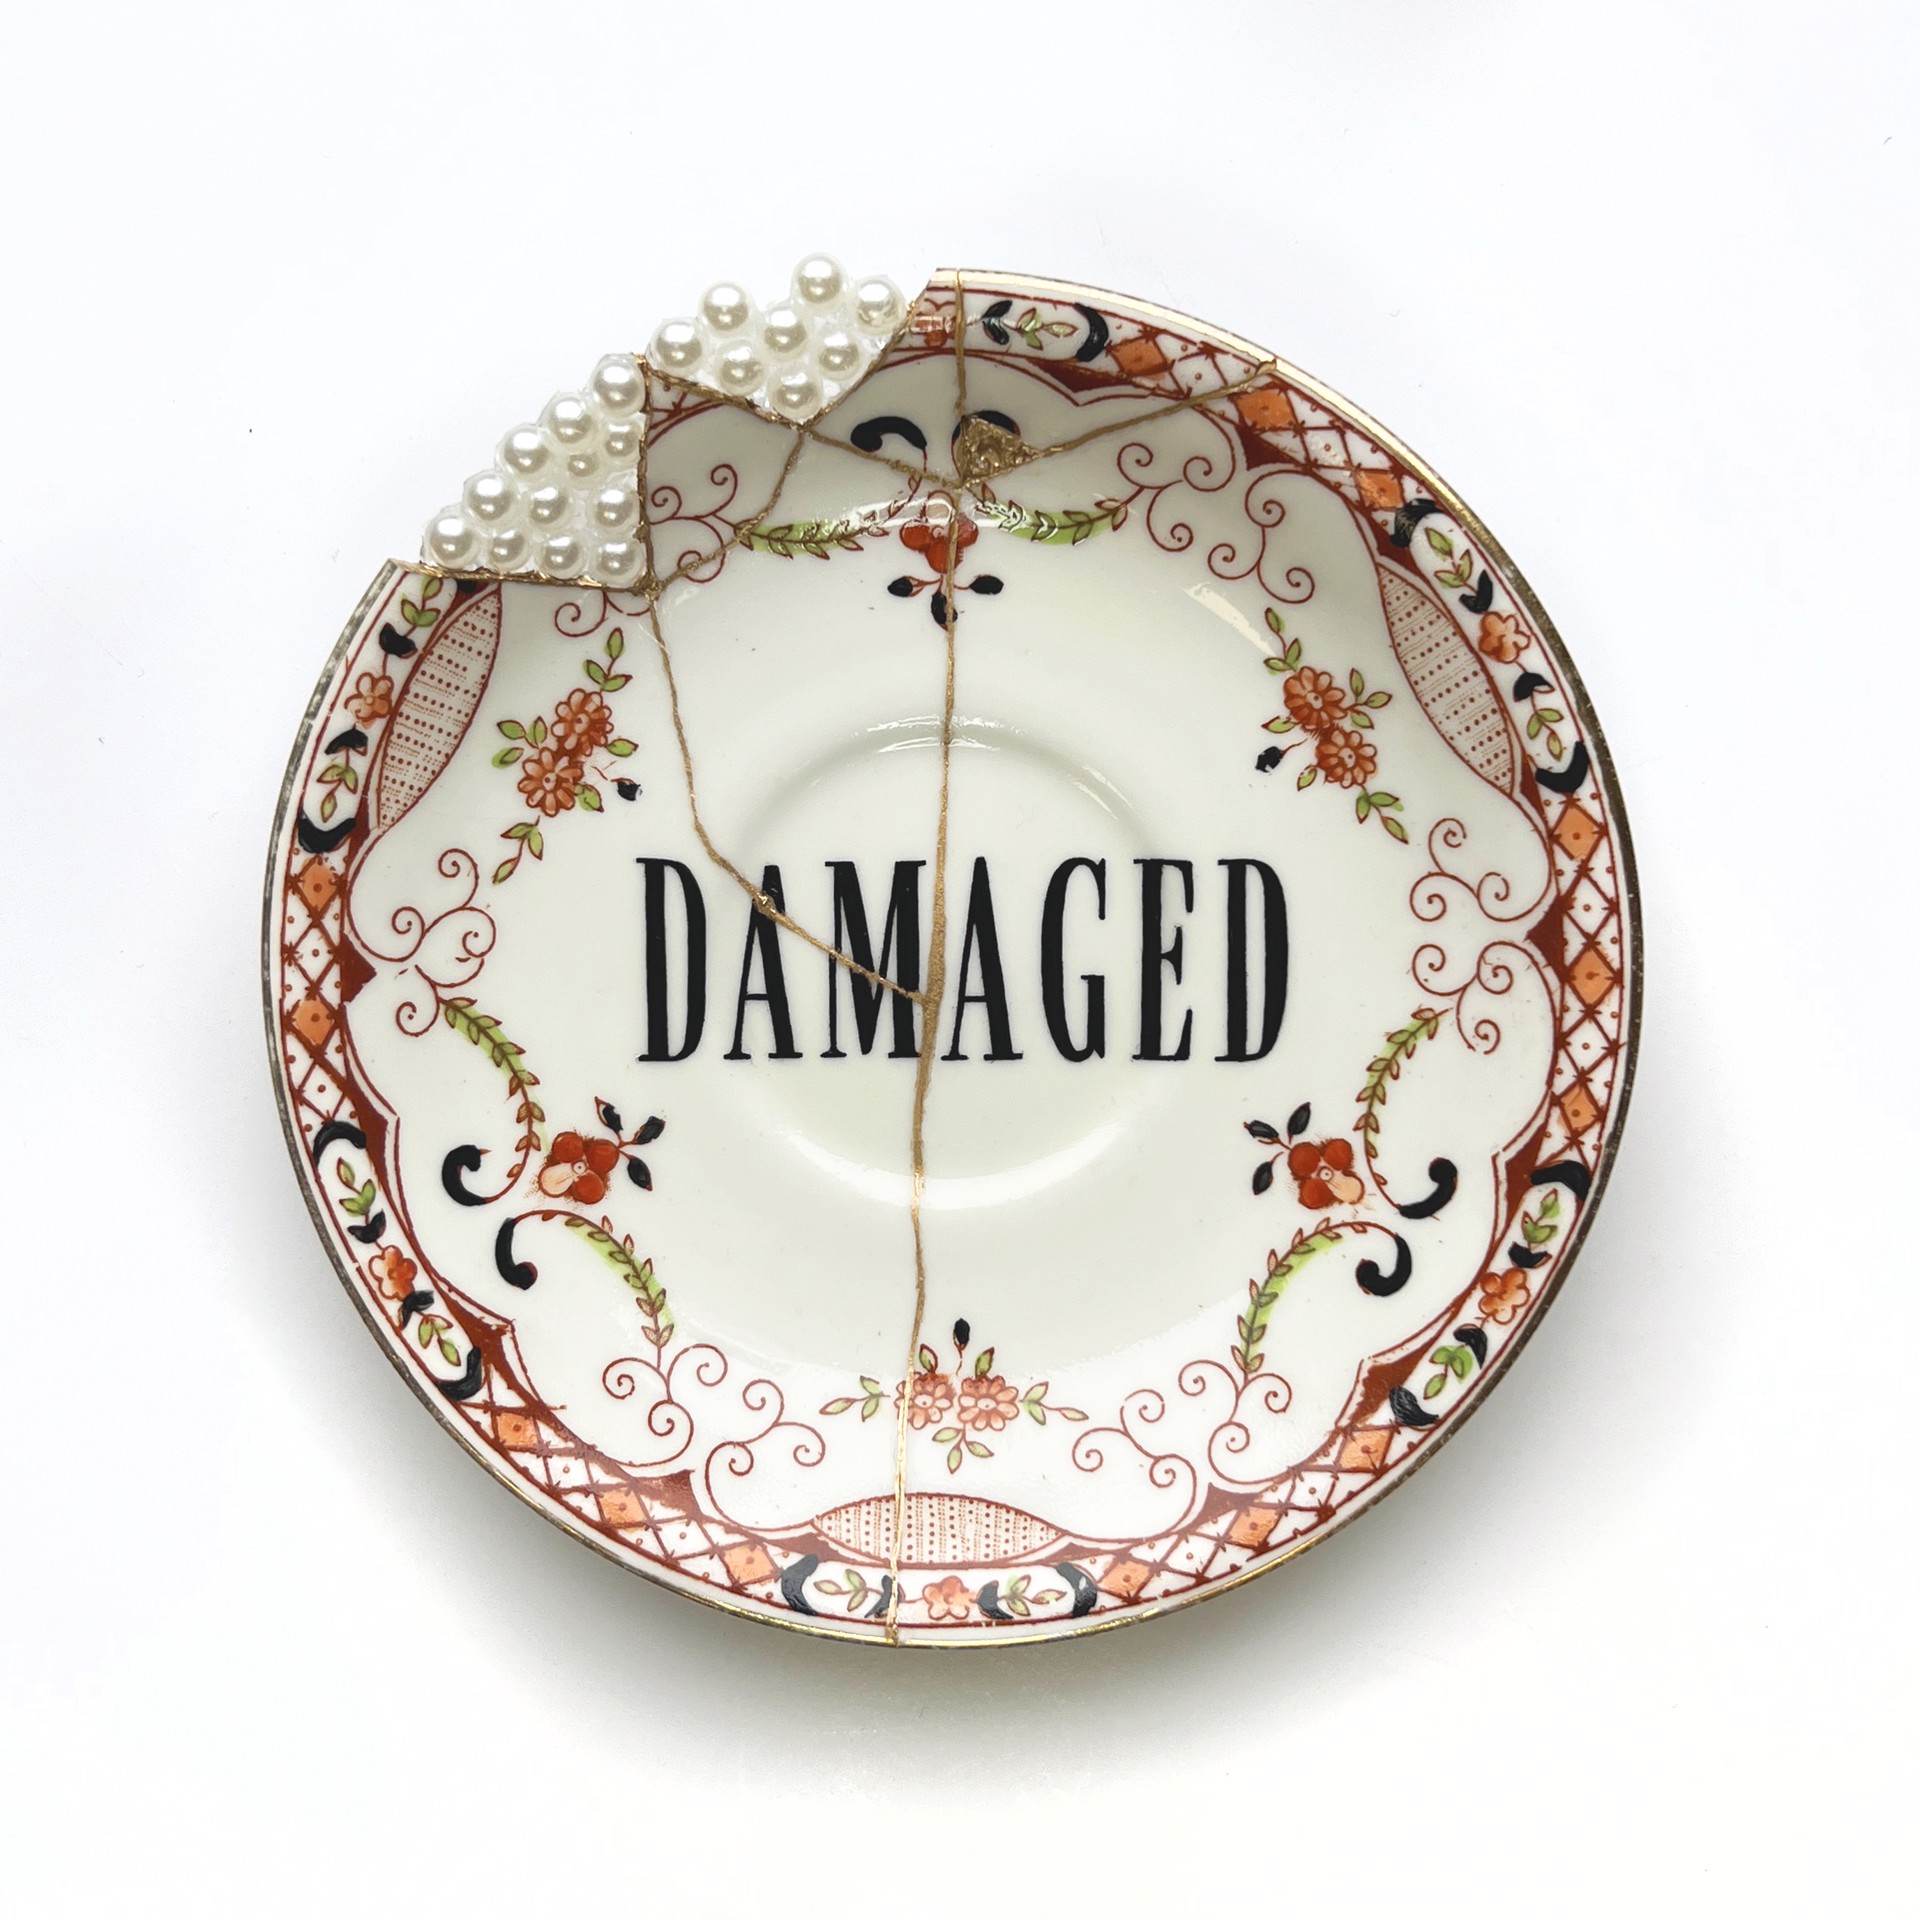 Damaged (embellished) by Marie-Claude Marquis